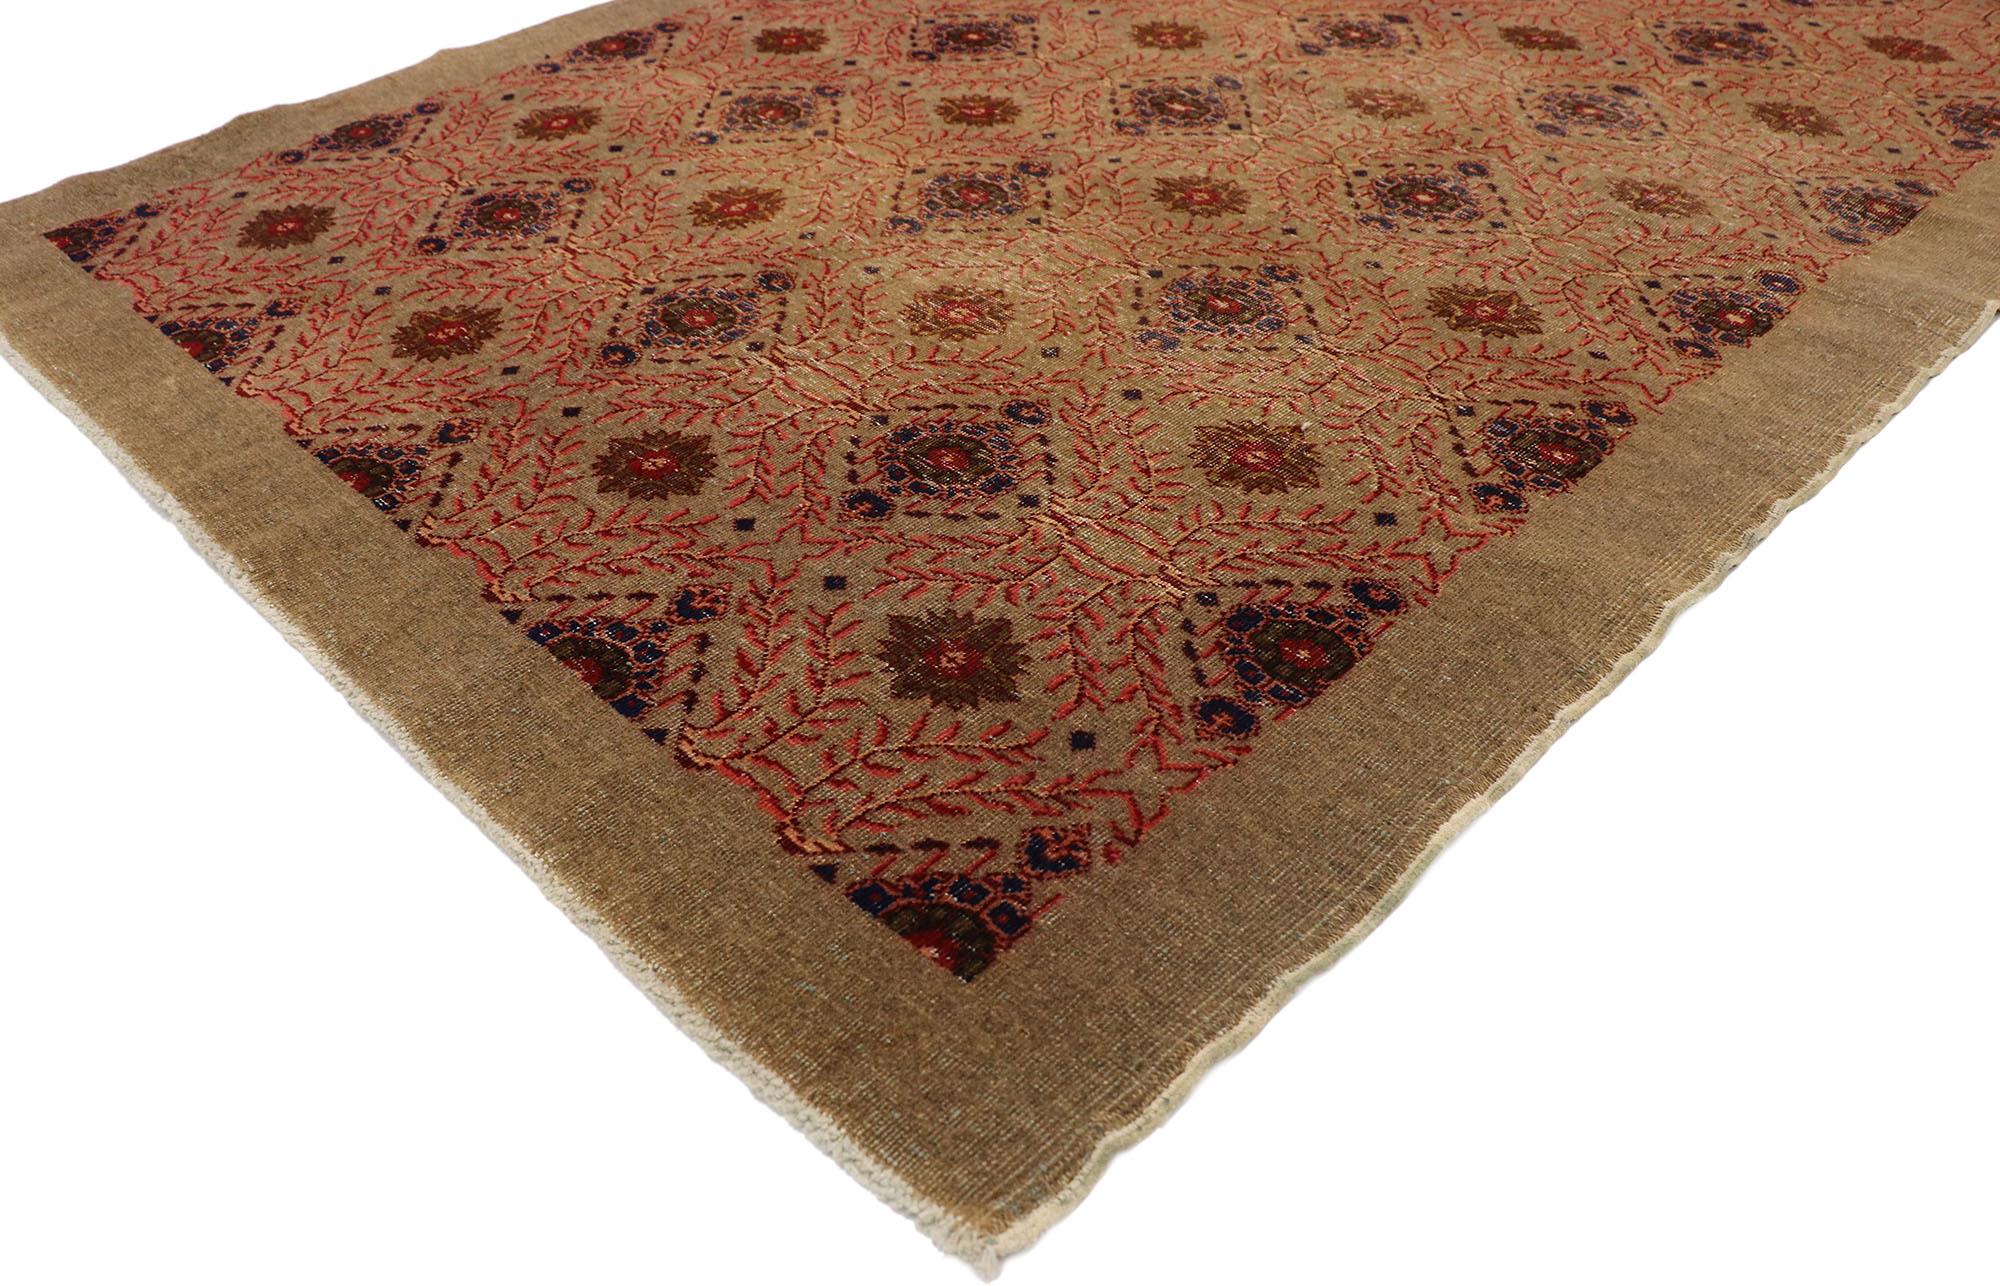 52853, distressed vintage Turkish Sivas rug with modern rustic Artisan style. This hand knotted wool distressed vintage Turkish Sivas rug features an all-over trellis pattern composed of offset rows of rounded floral motifs outlined with trompe